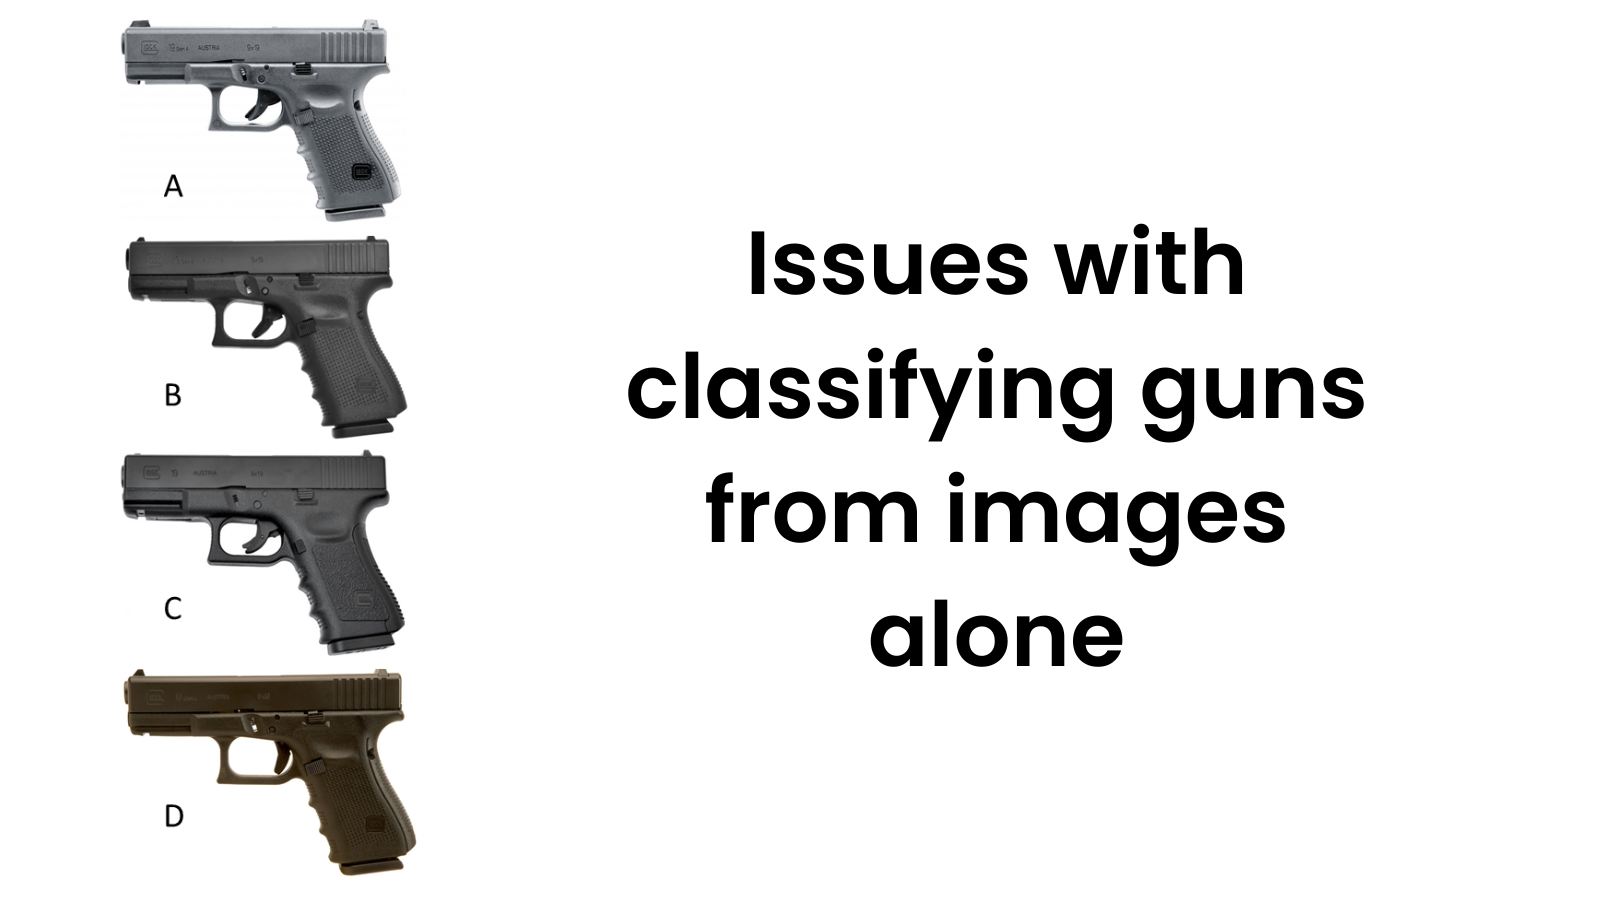 Issues With Classifying Guns From Images Alone